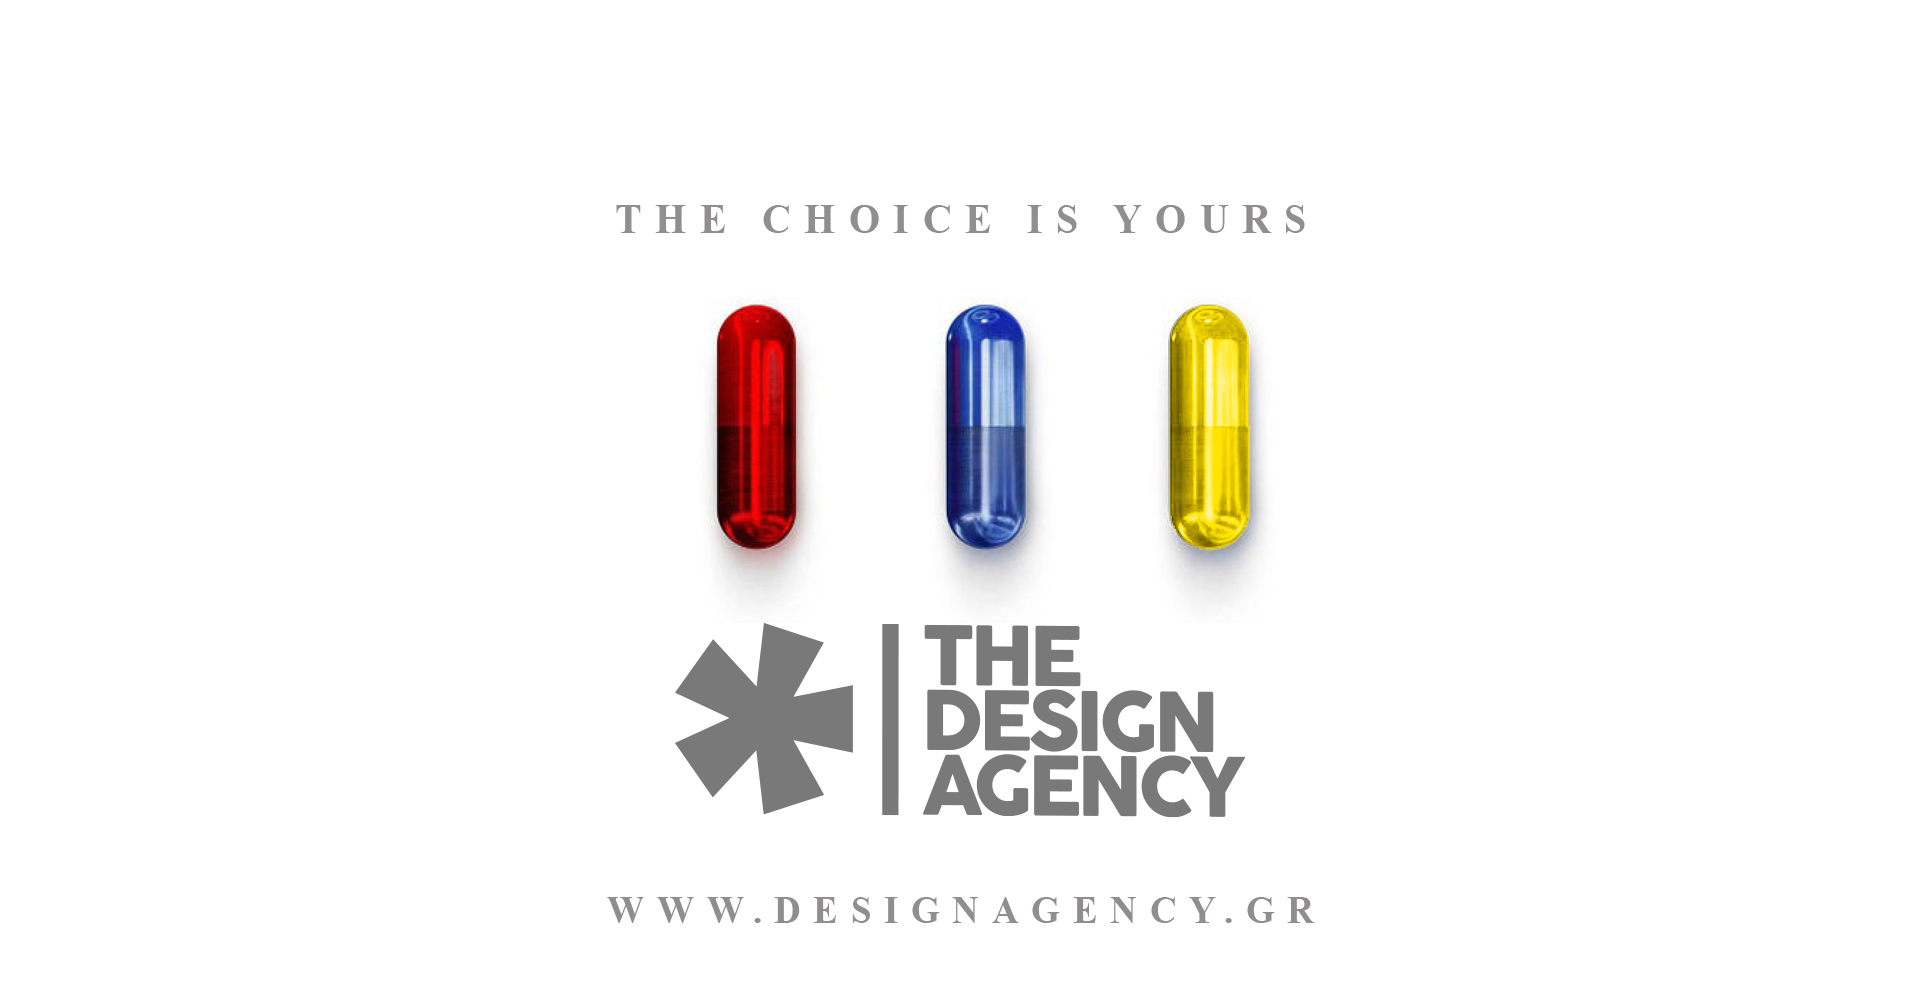 THE CHOICE IS YOURS. the Design Agency